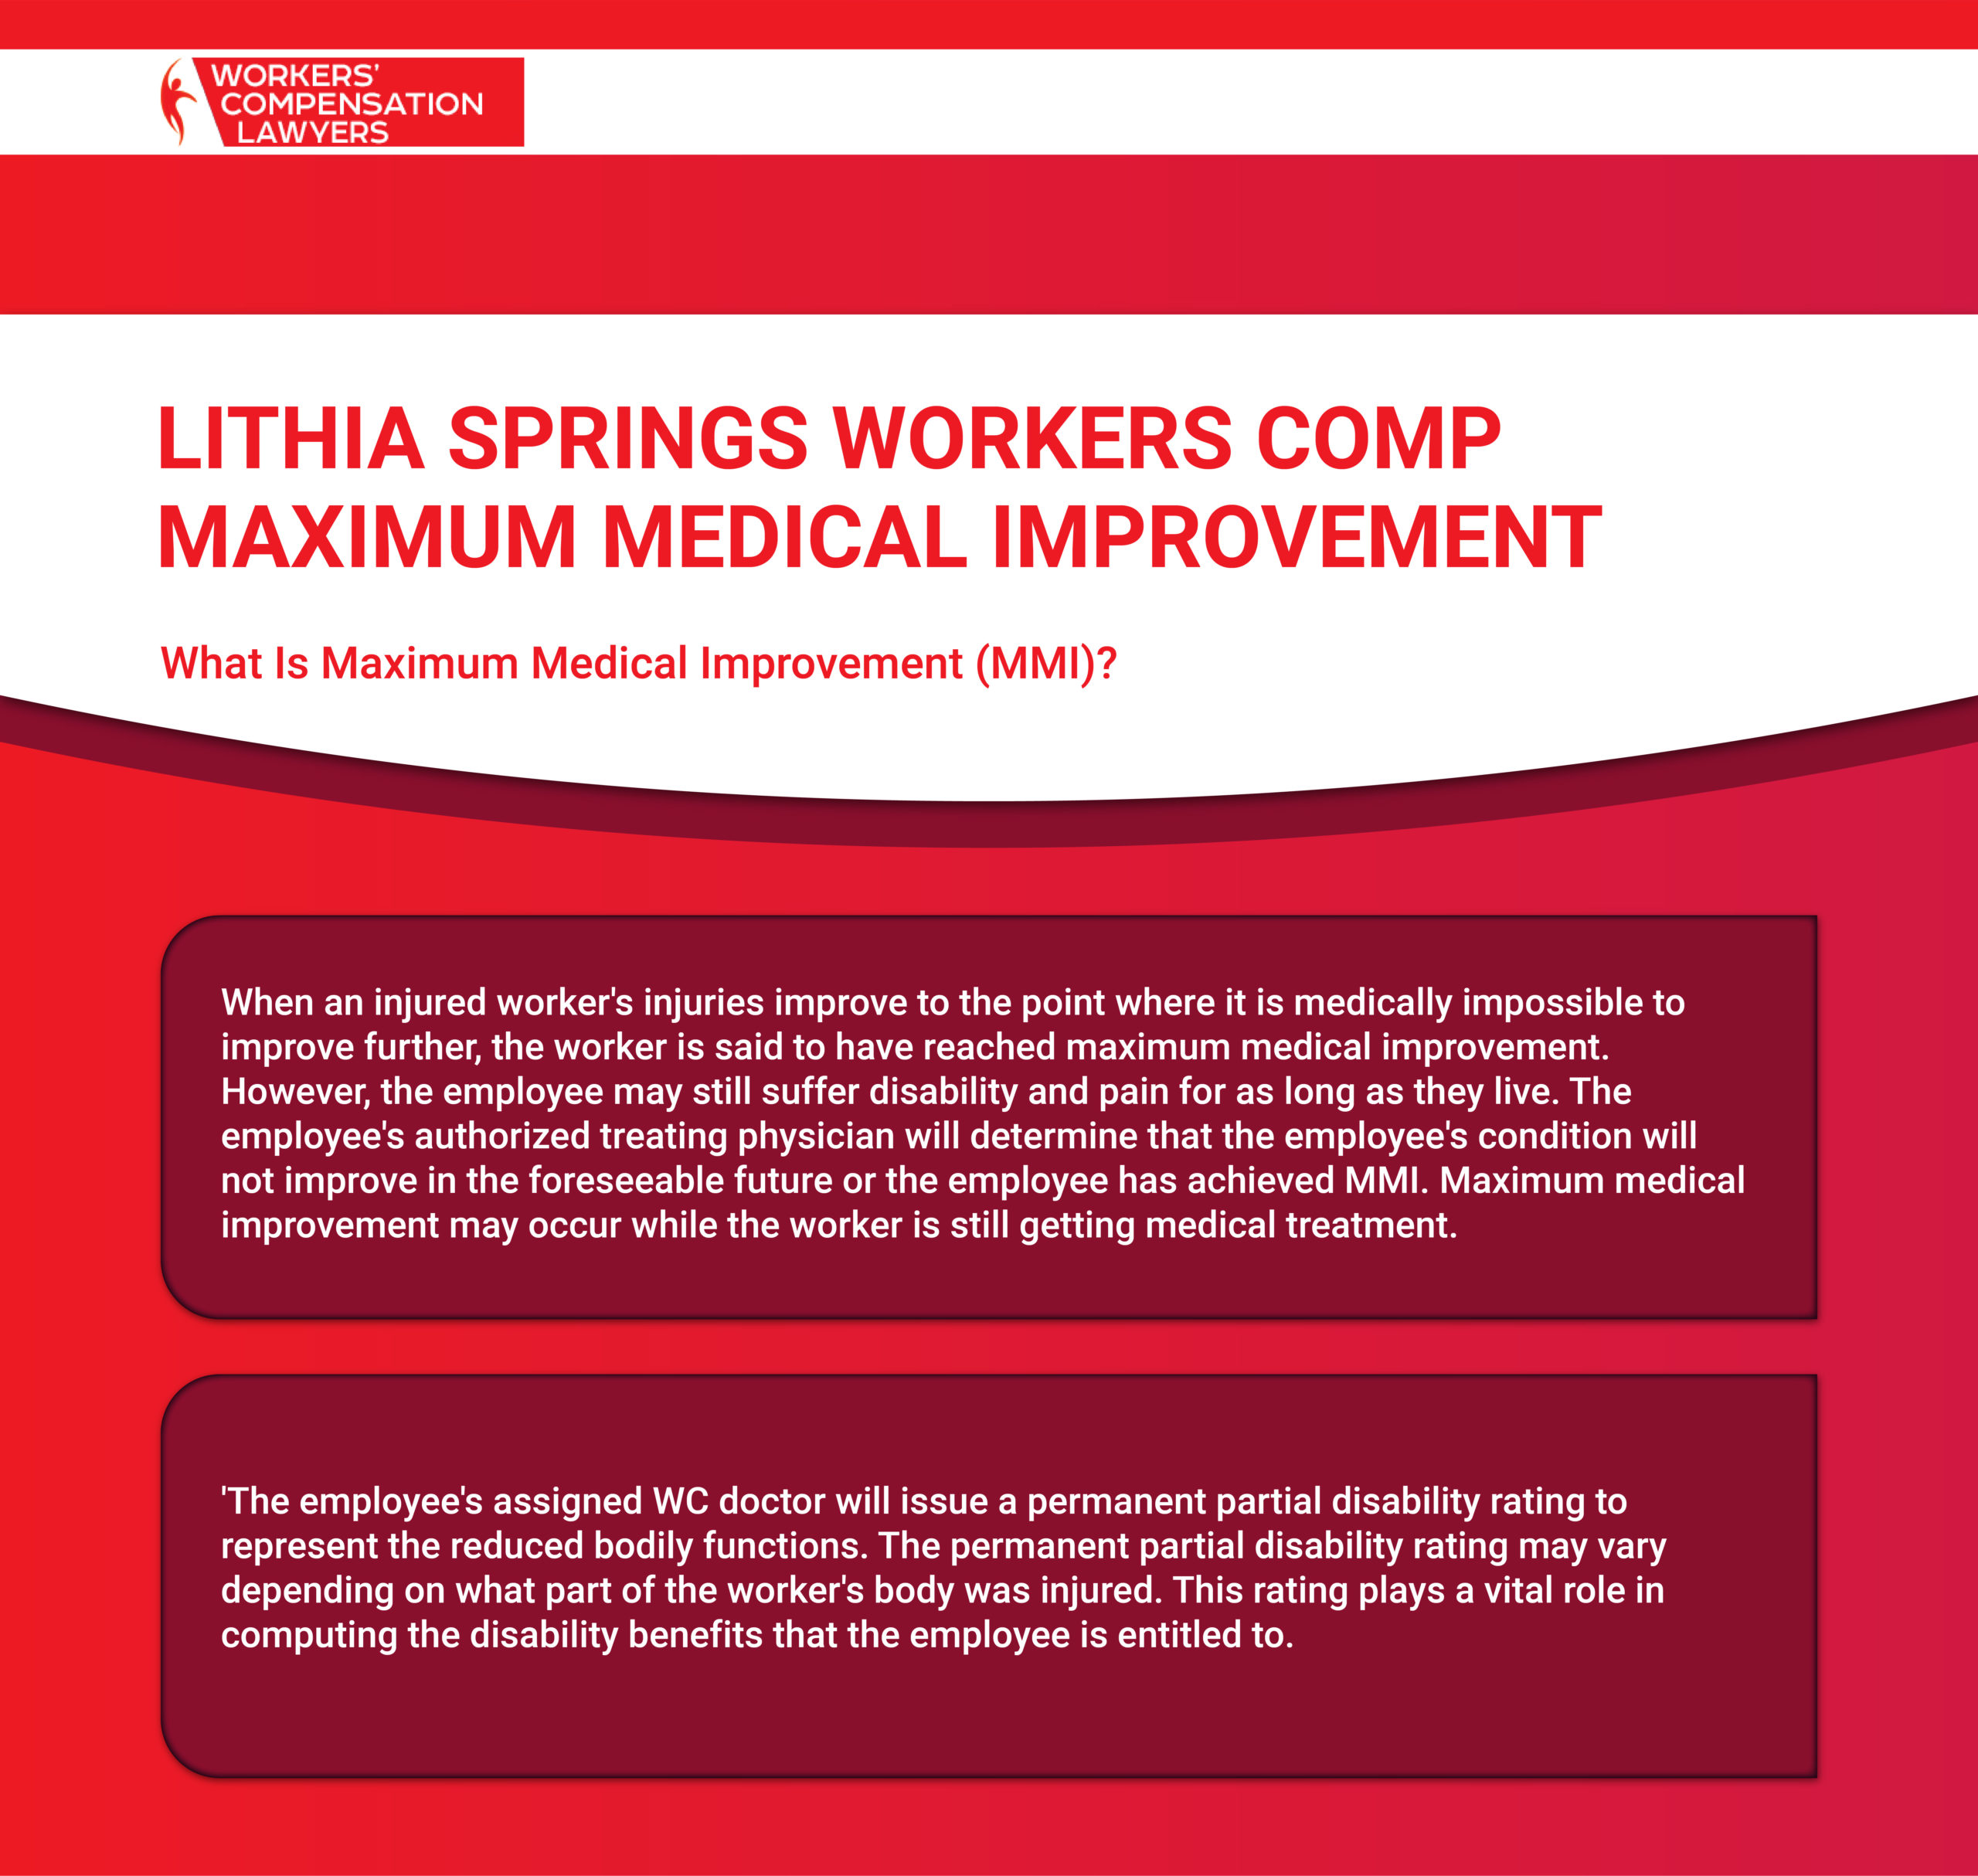 Lithia Springs Workers Compensation Maximum Medical Improvement Infographic